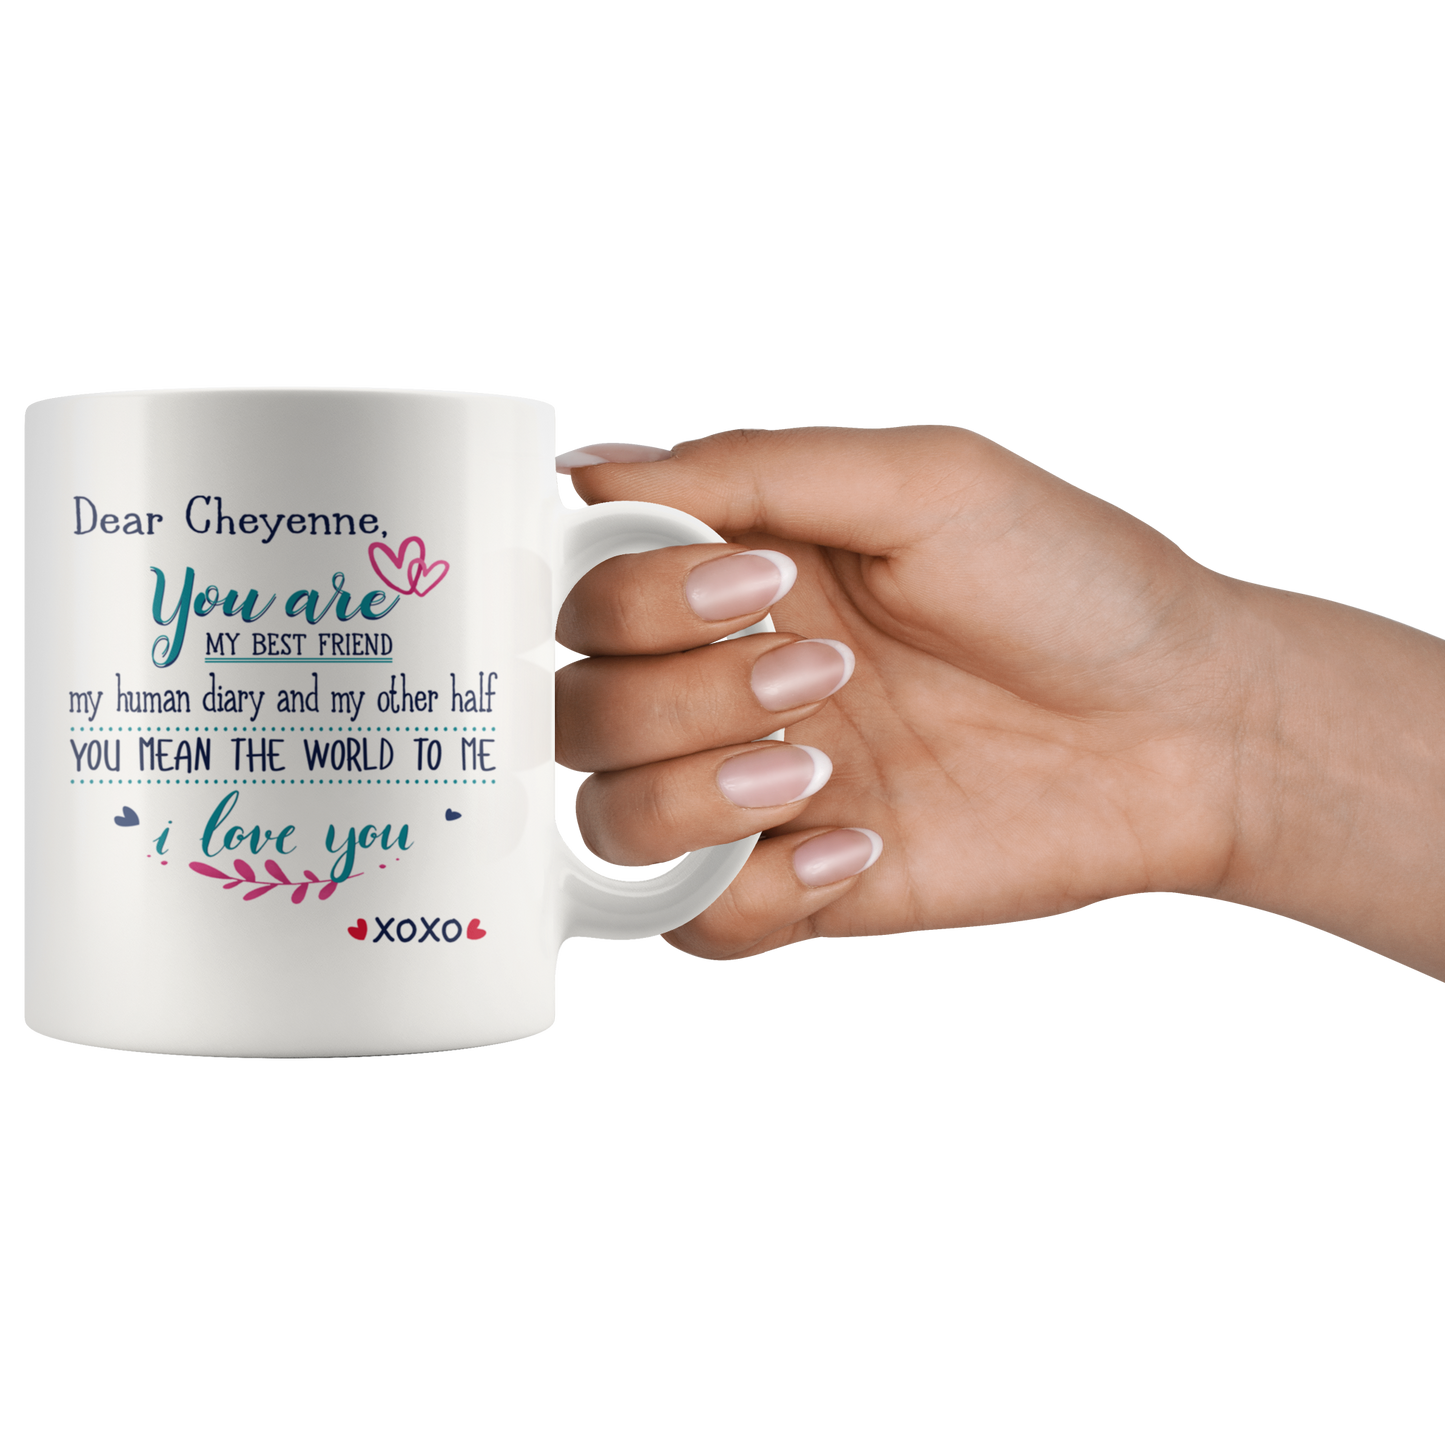 ND20452249-sp-16850 - Christmas Gifts For Wife From Husband Mug XoXo 11 oz - Dear